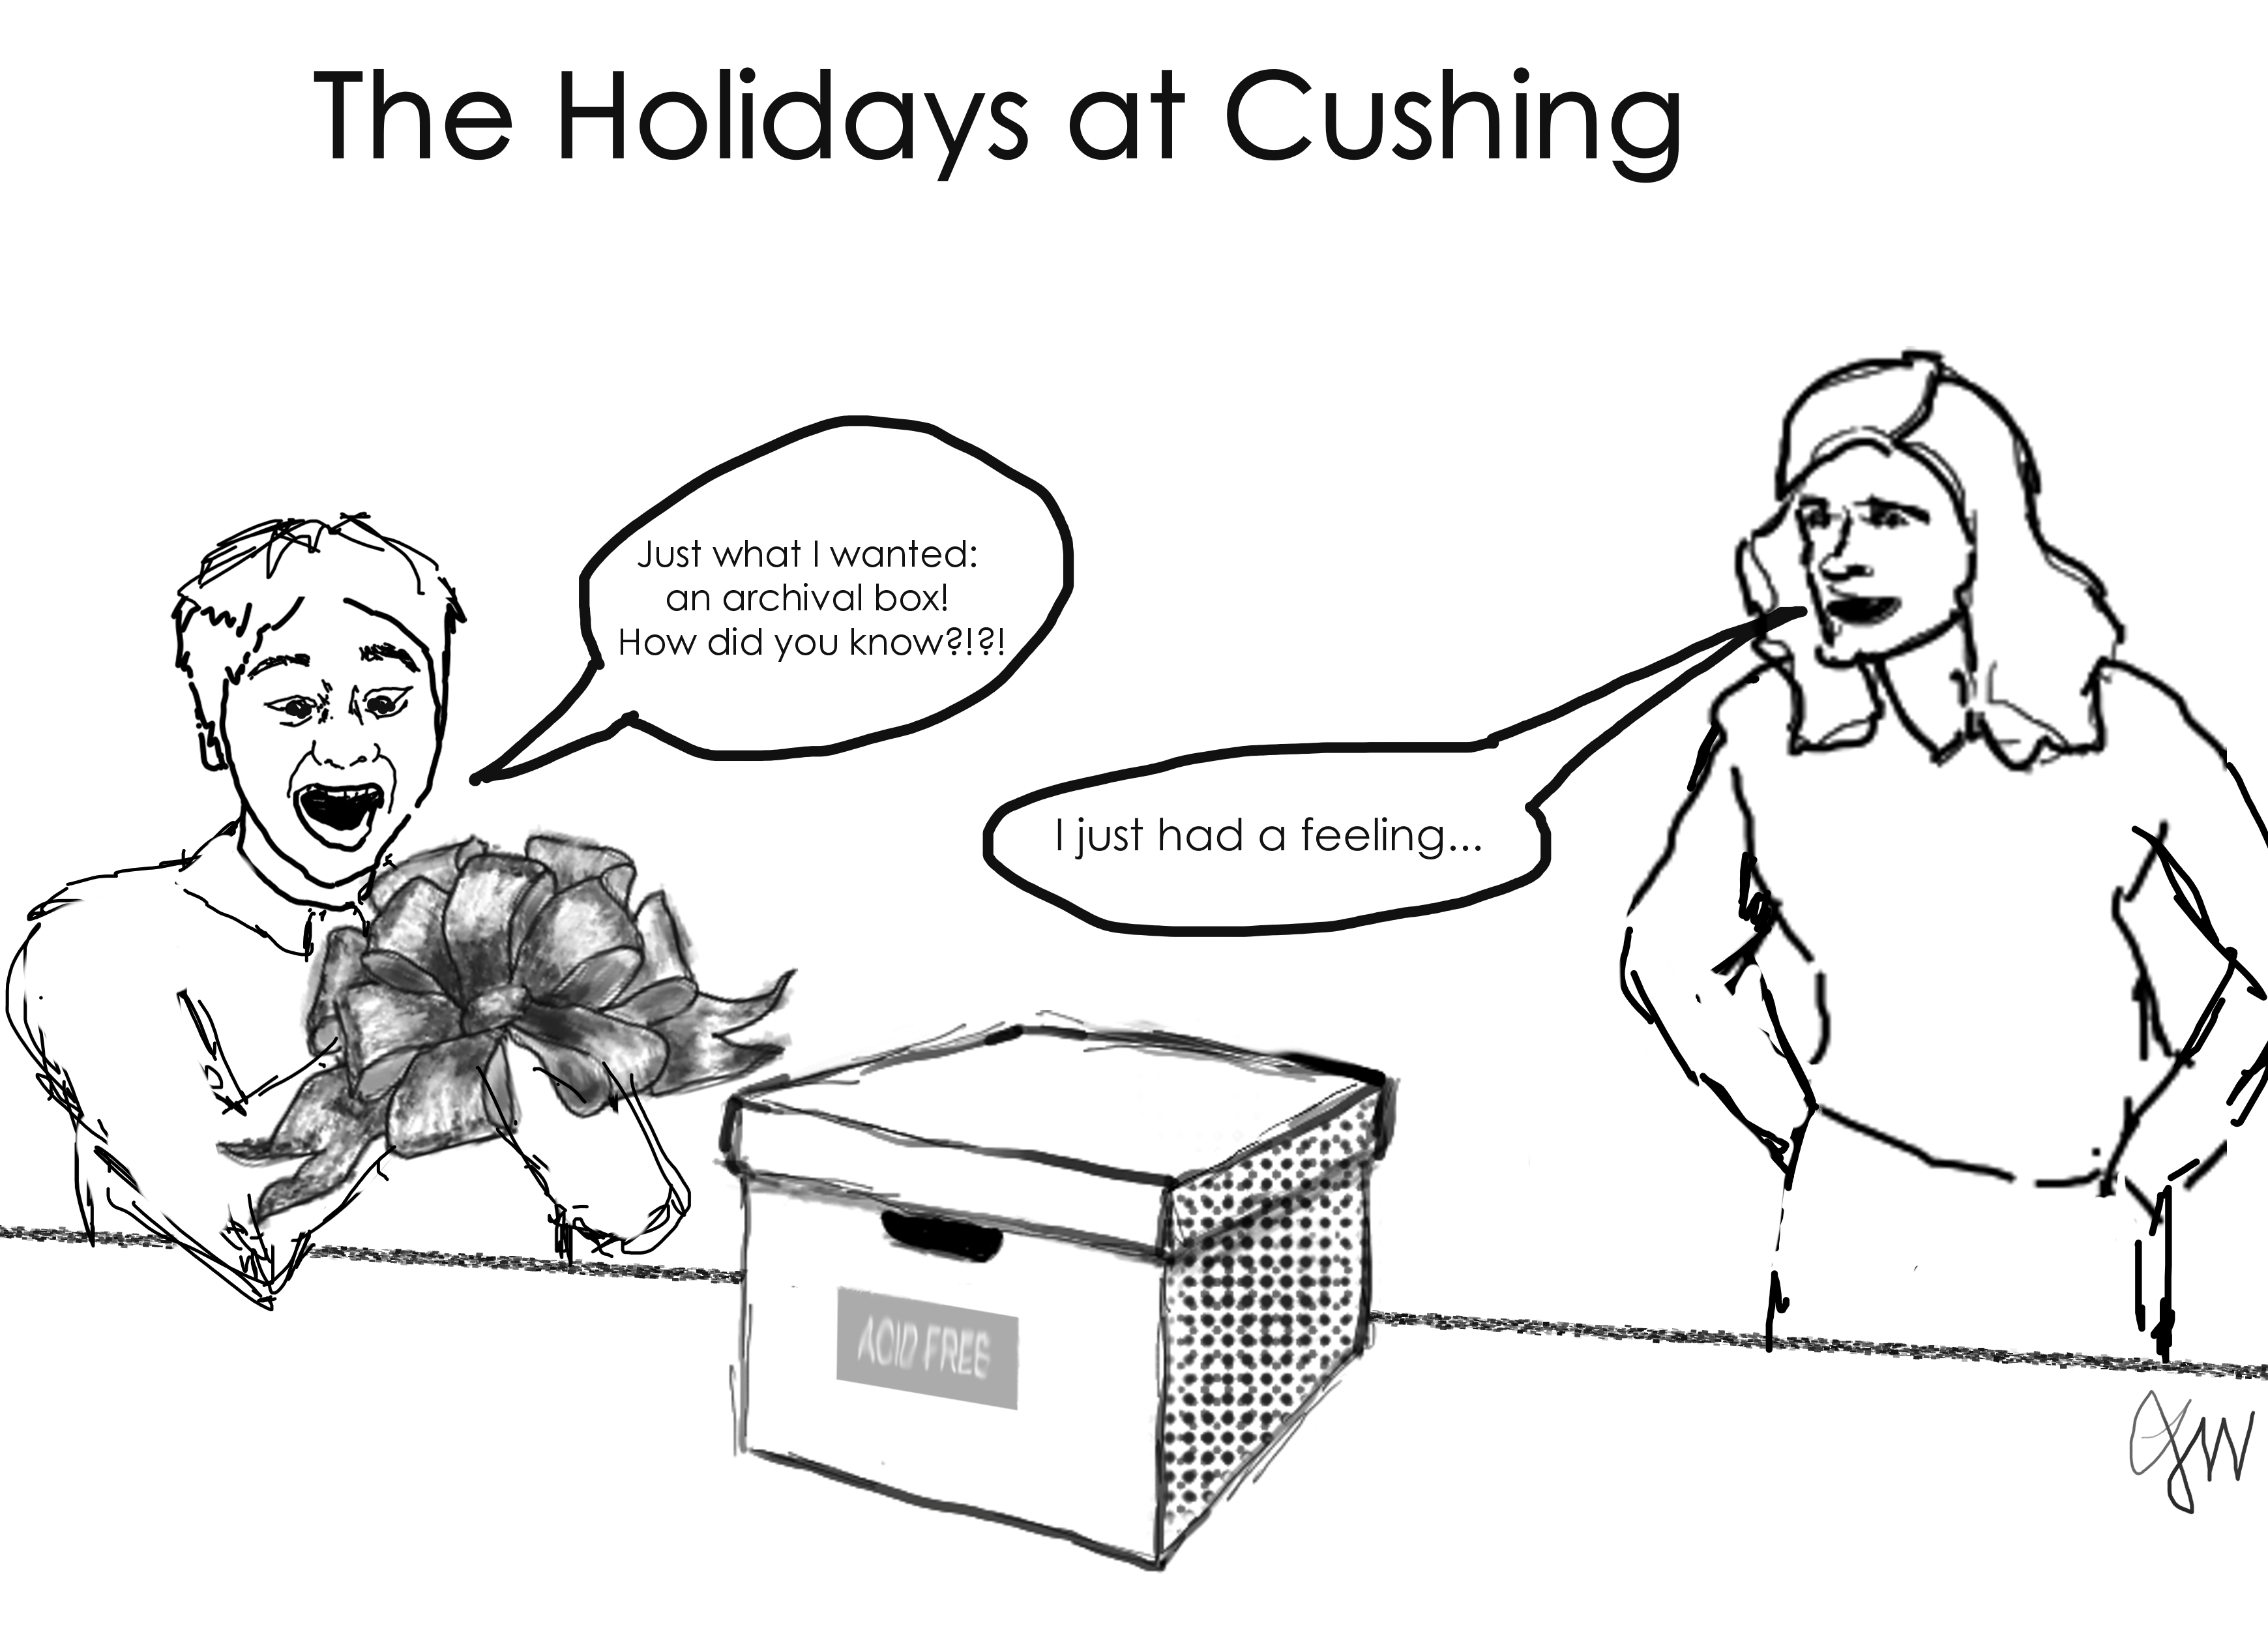 Alt text: Humorous cartoon by Leslie J. Winter, entitled “The Holidays at Cushing.” The black and white line-drawing shows an archival box on a table, with the words “Acid Free” across the front. Two people are standing by the table. One person, holding a festive bow, exclaims “Just what I wanted: an archival box! How did you know?!?!” Another person is standing nearby and replies, “I just had a feeling...”